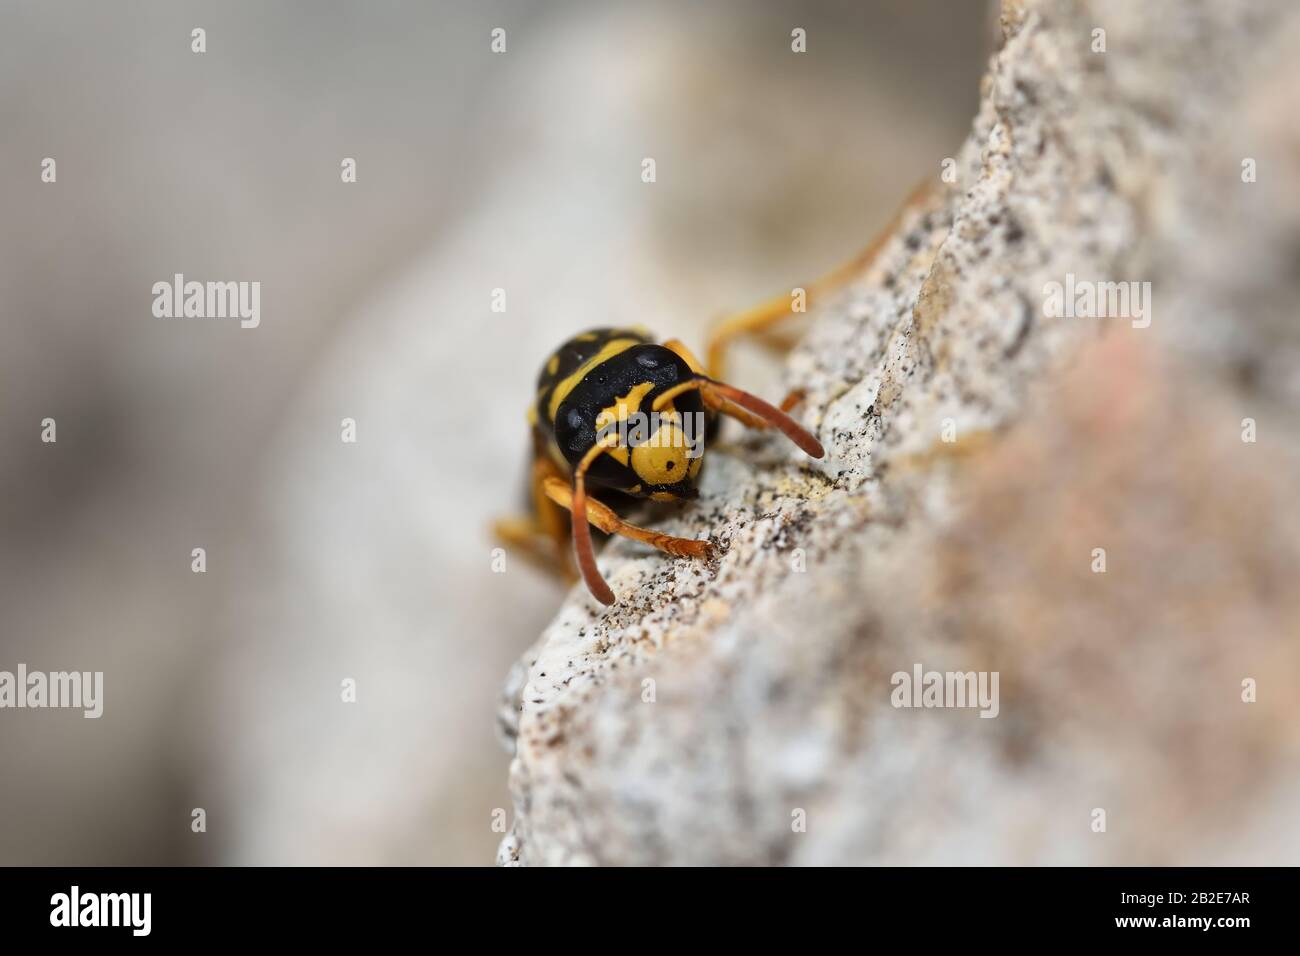 Portrait of a wasp emerging between some stones Stock Photo